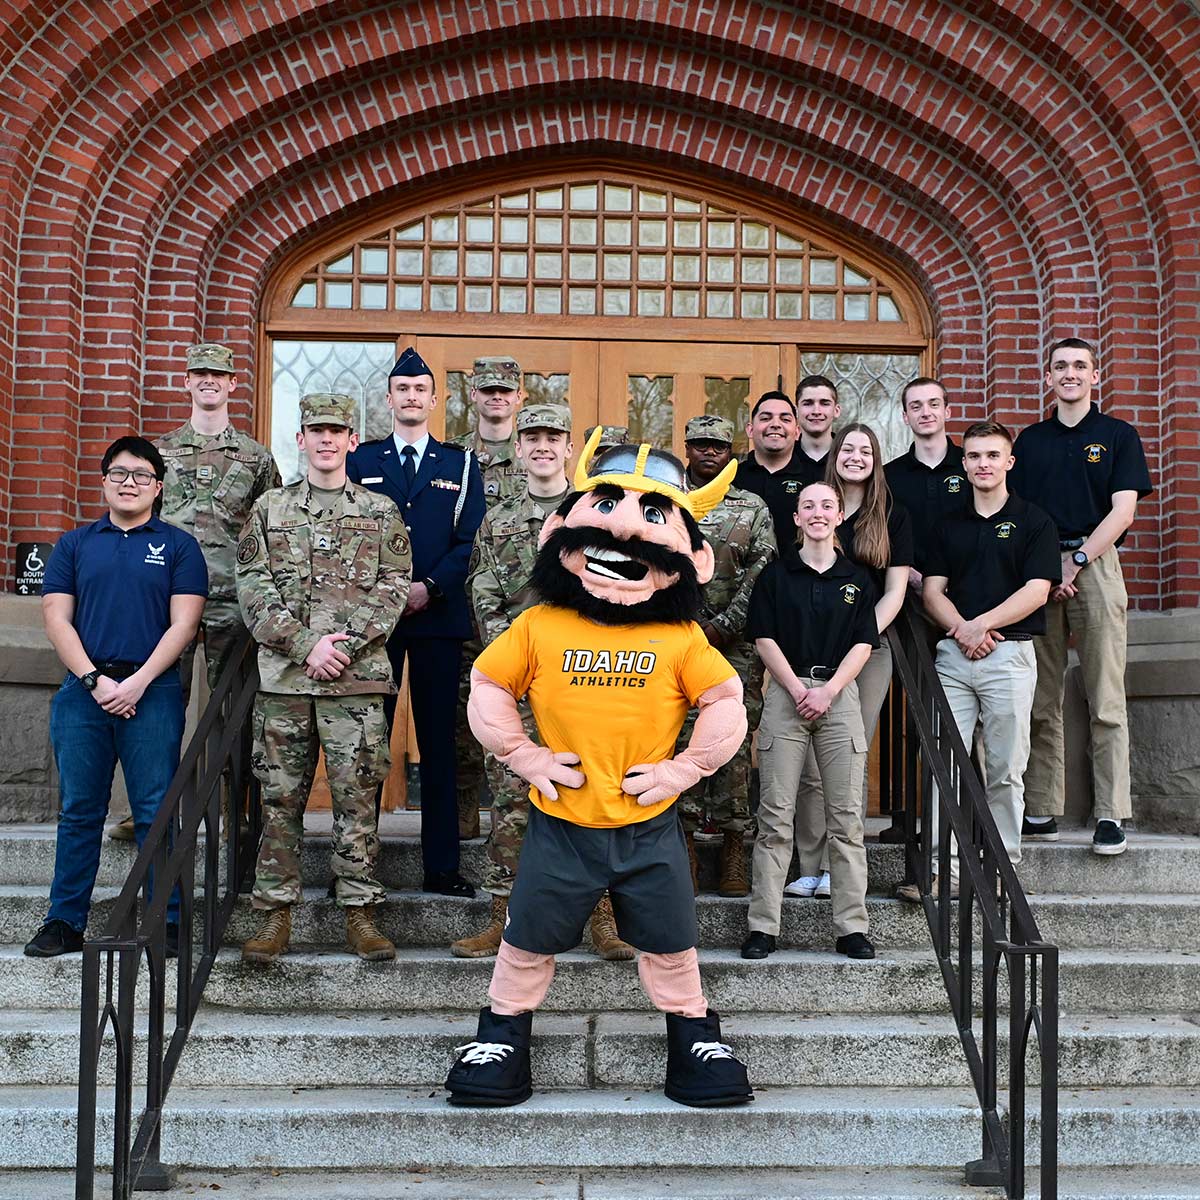 Joe Vandal poses with members of the military on the northern steps of the Administration Building.